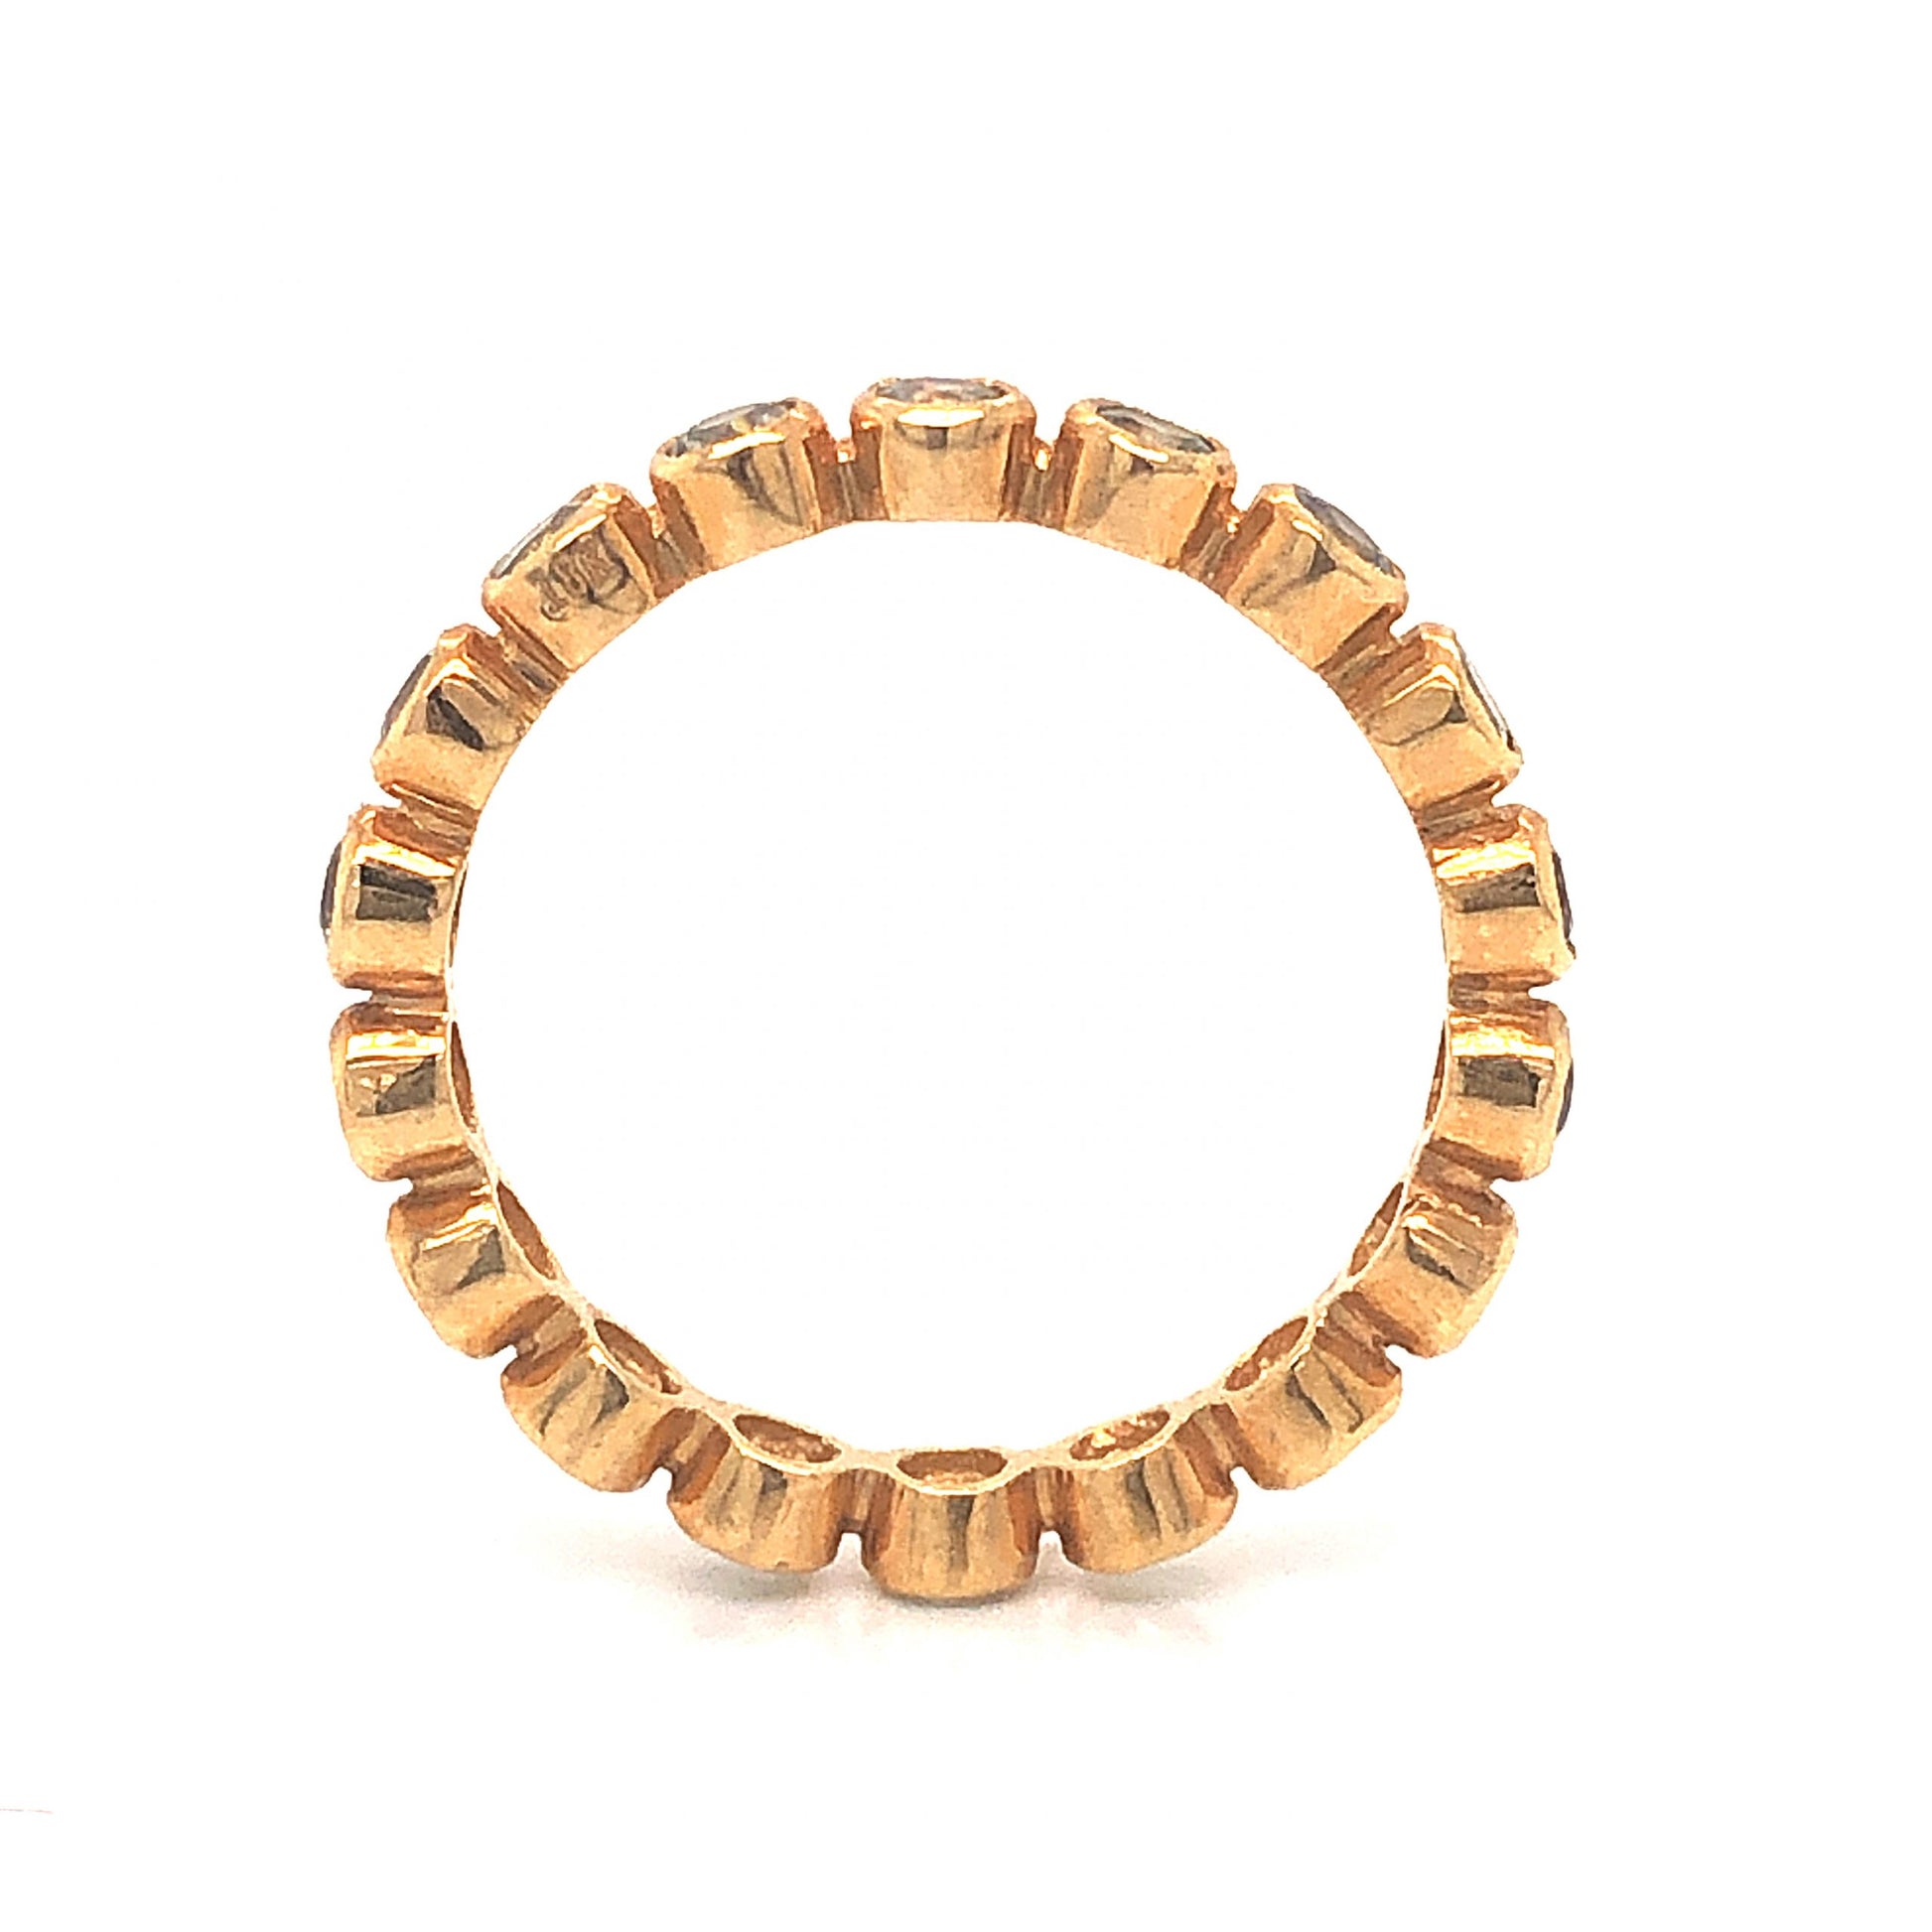 Green Sapphire Eternity Band in 18k Yellow GoldComposition: 18 Karat Yellow Gold Ring Size: 7 Total Gram Weight: 2.9 g Inscription: 18k
      